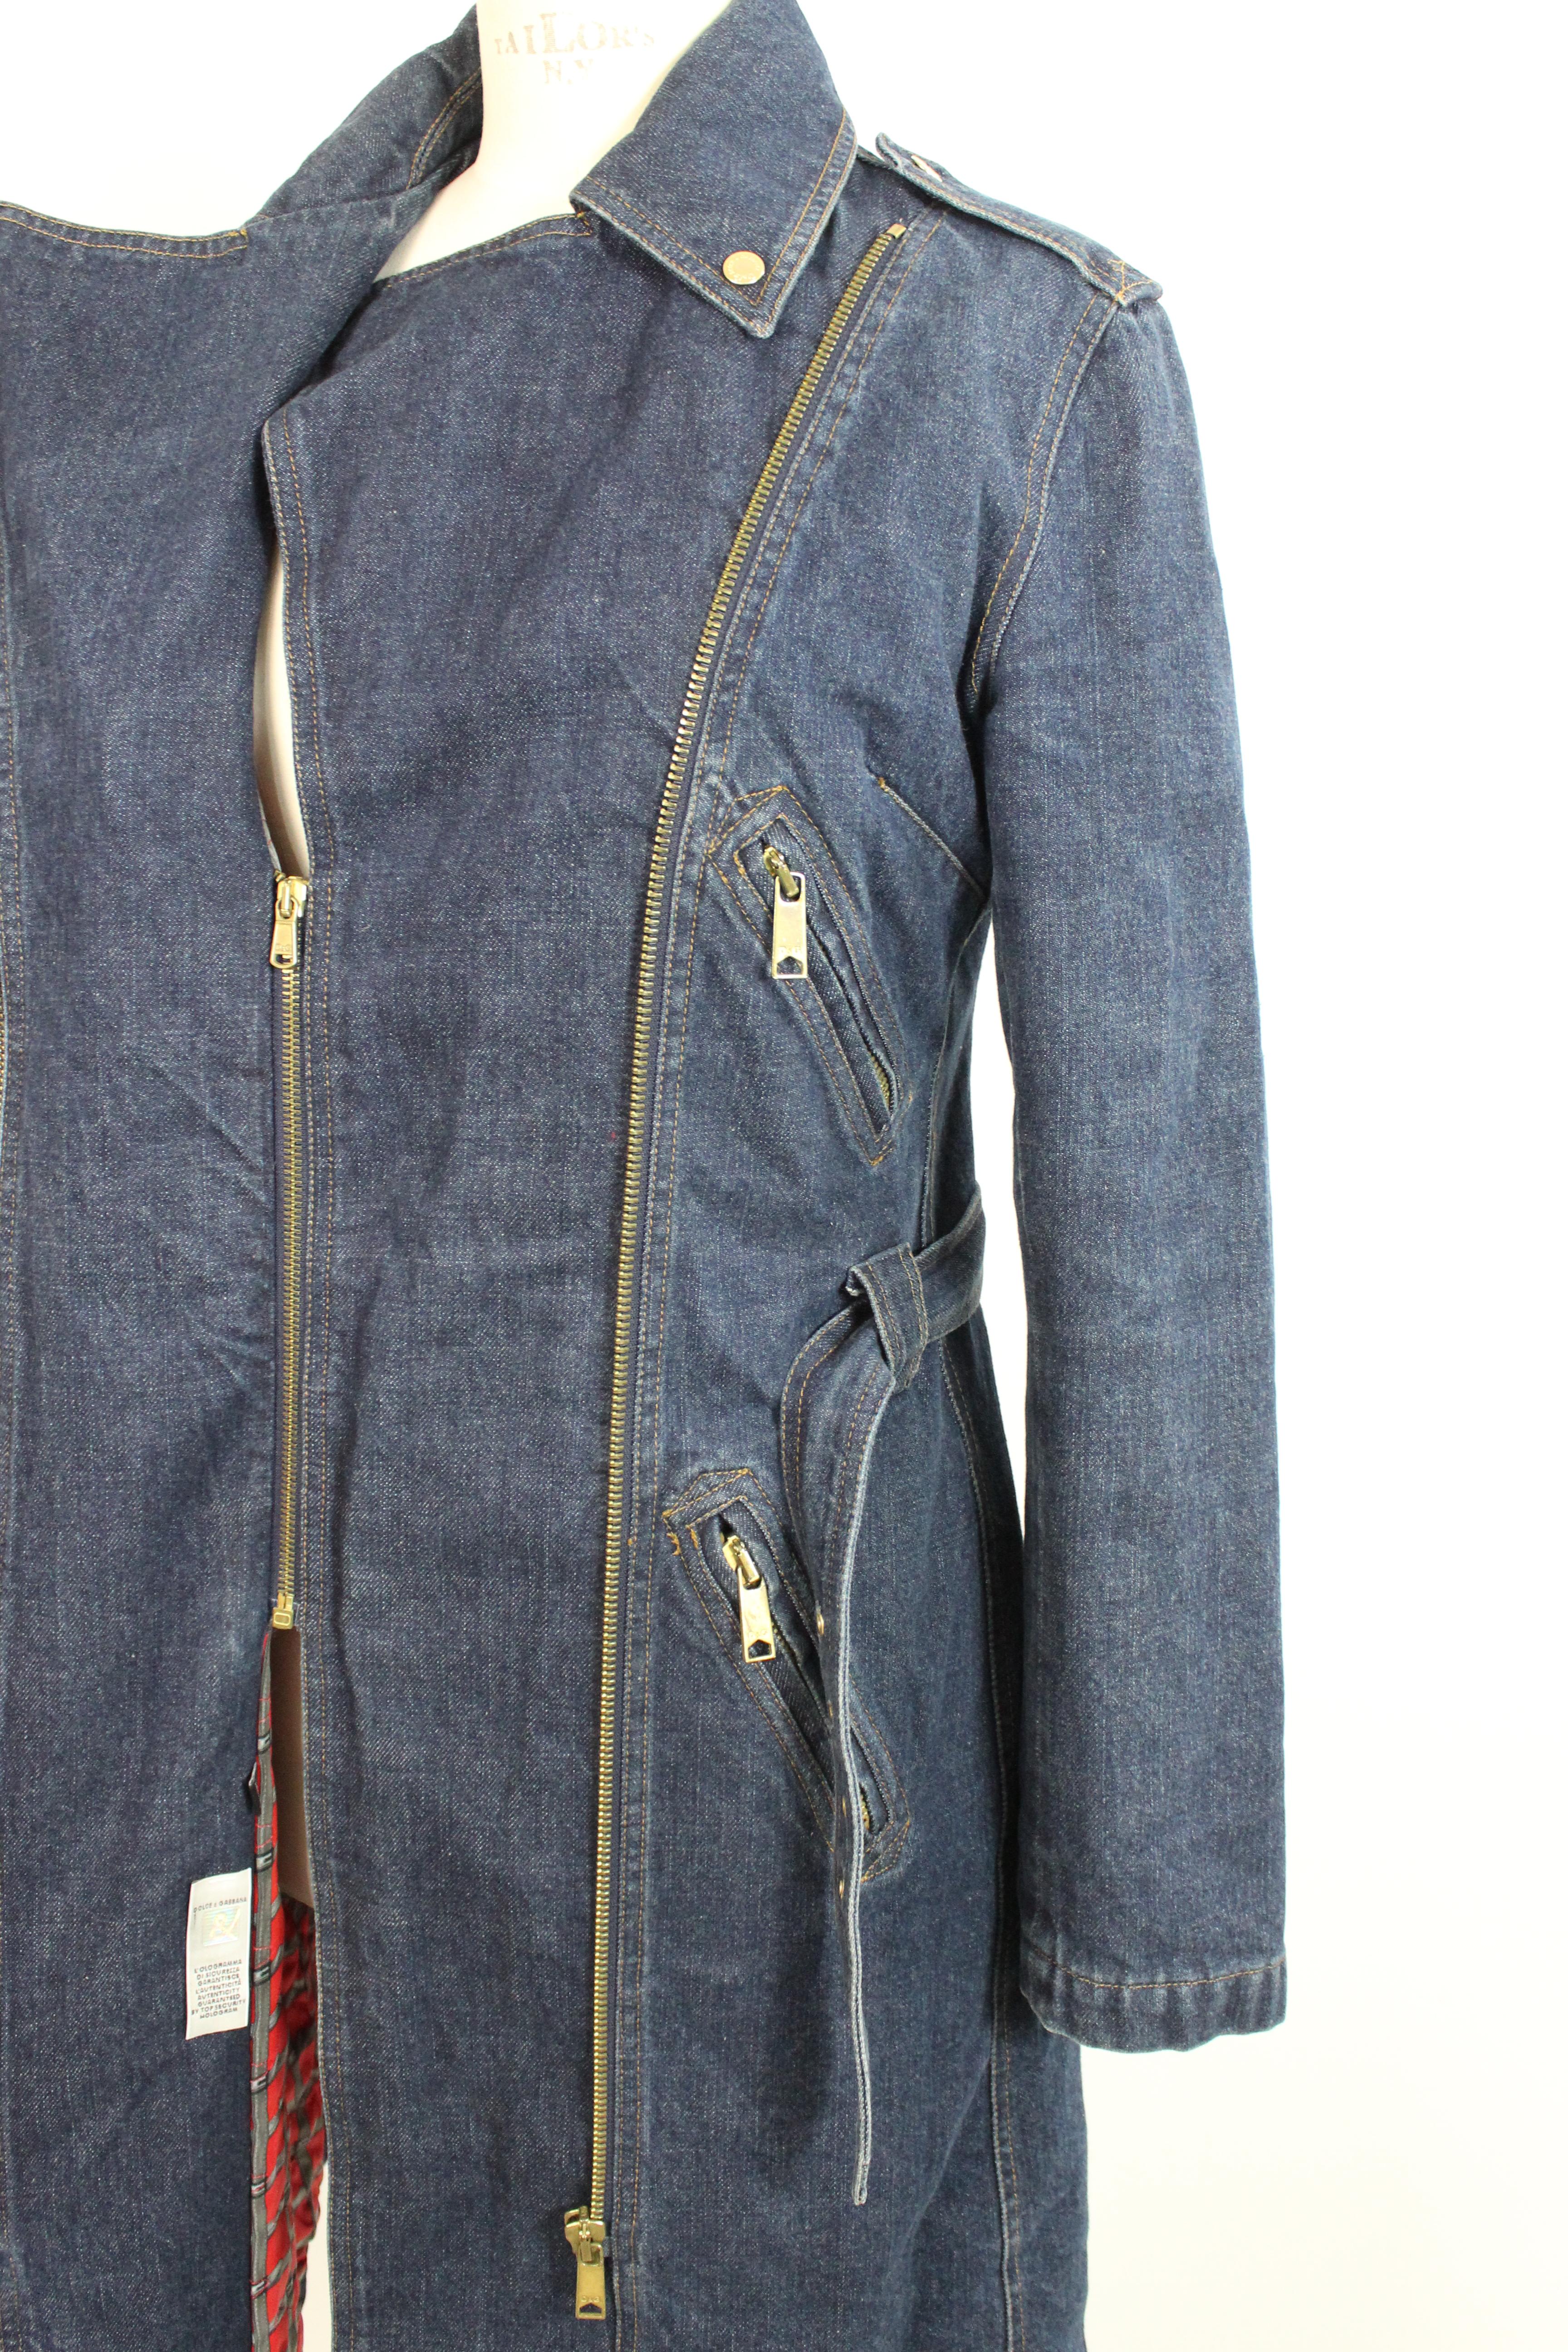 1990s Dolce & Gabbana Blue Cotton Jeans Trench Long Coat 1